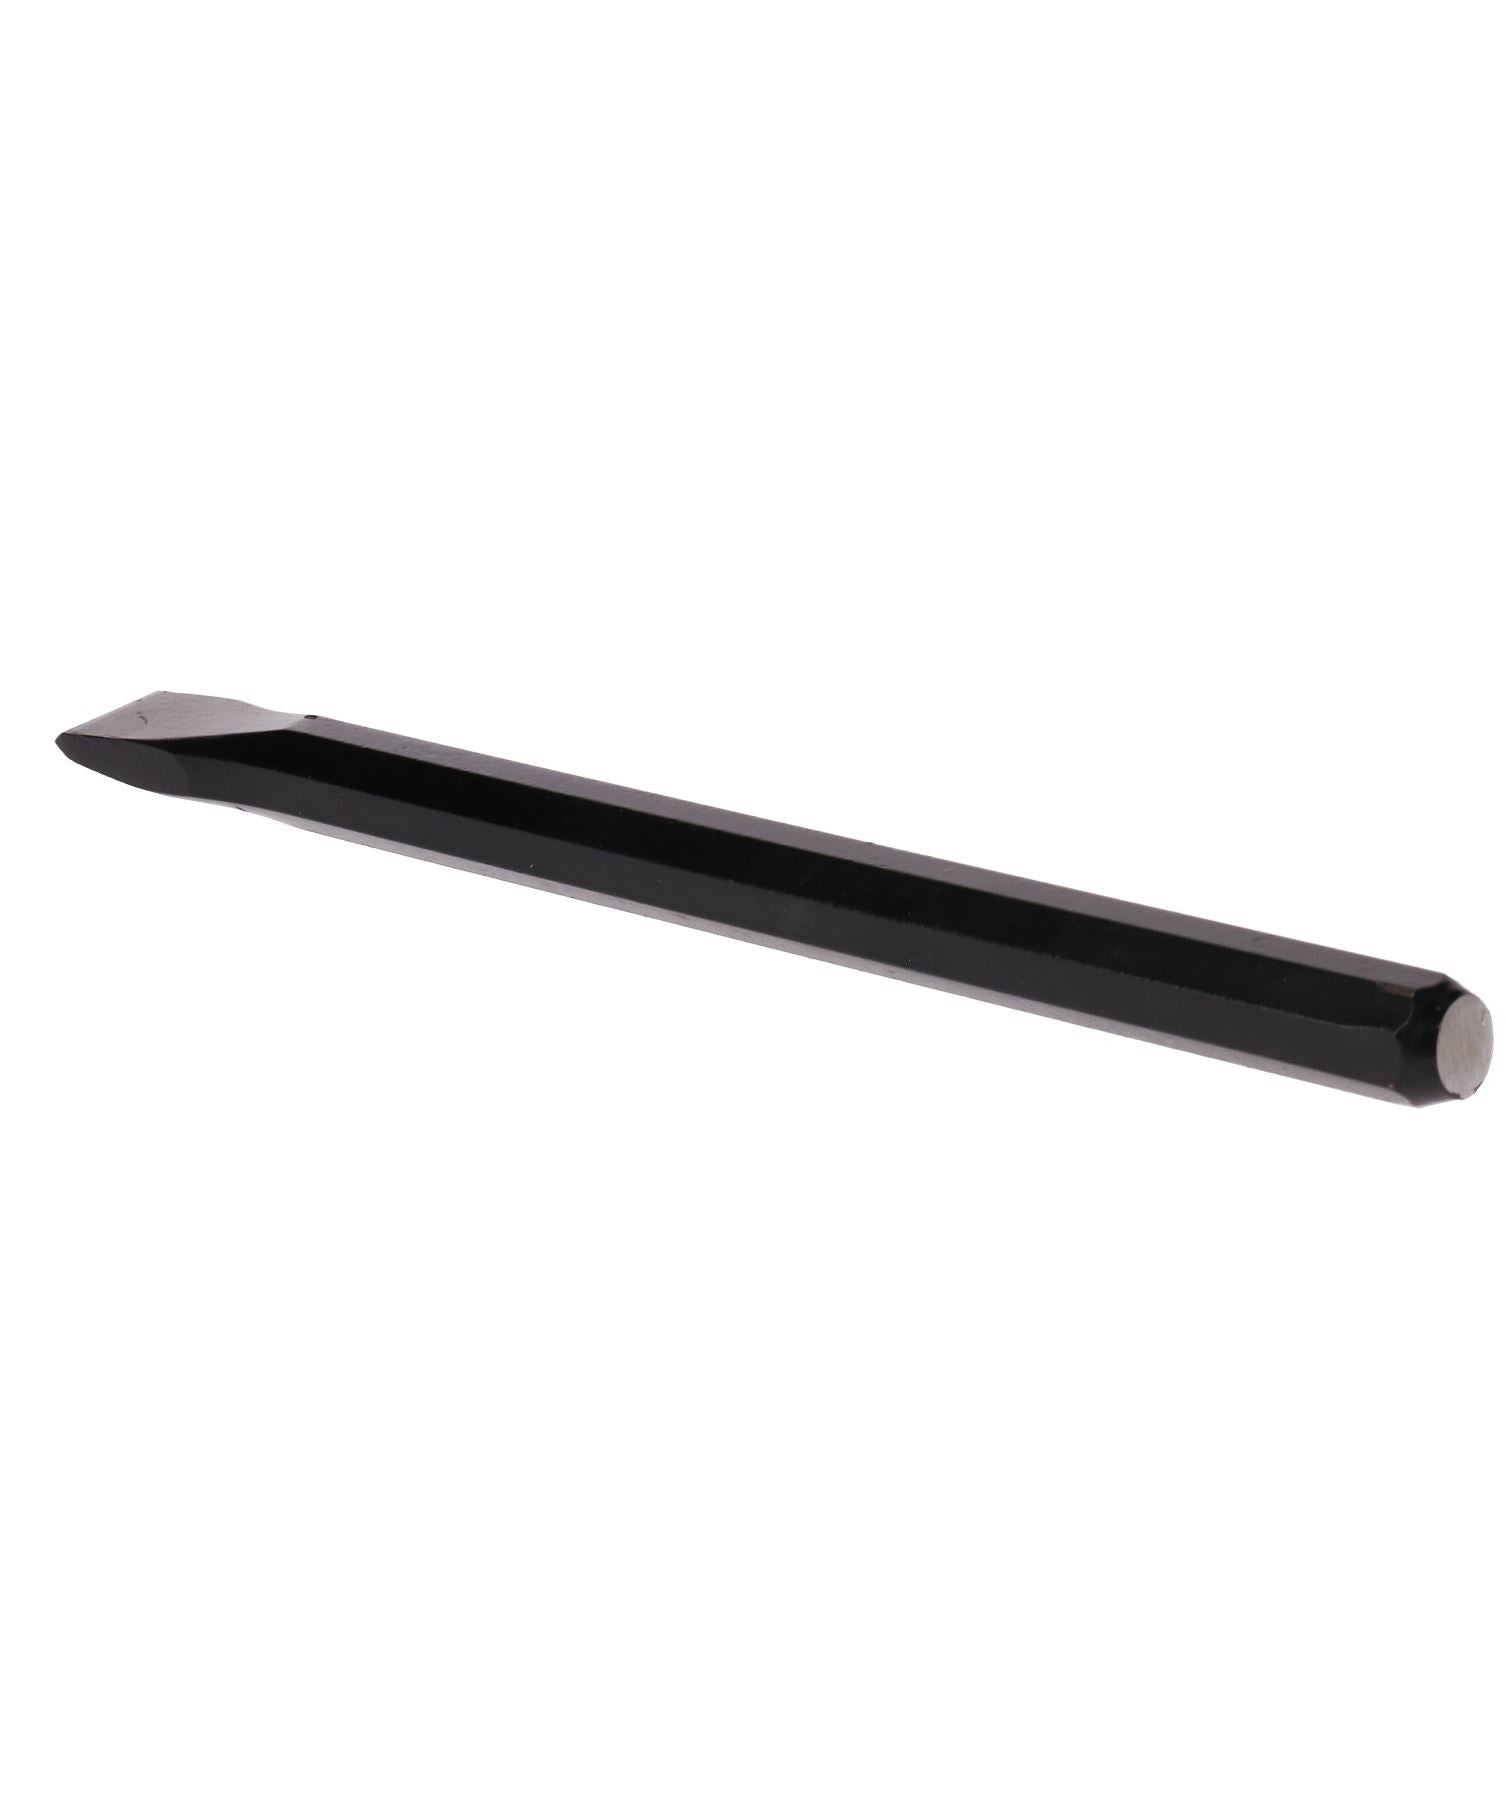 10" X 3/4" Black Cold Chisel Hardened Steel Constant For Brick Stone Block Steel